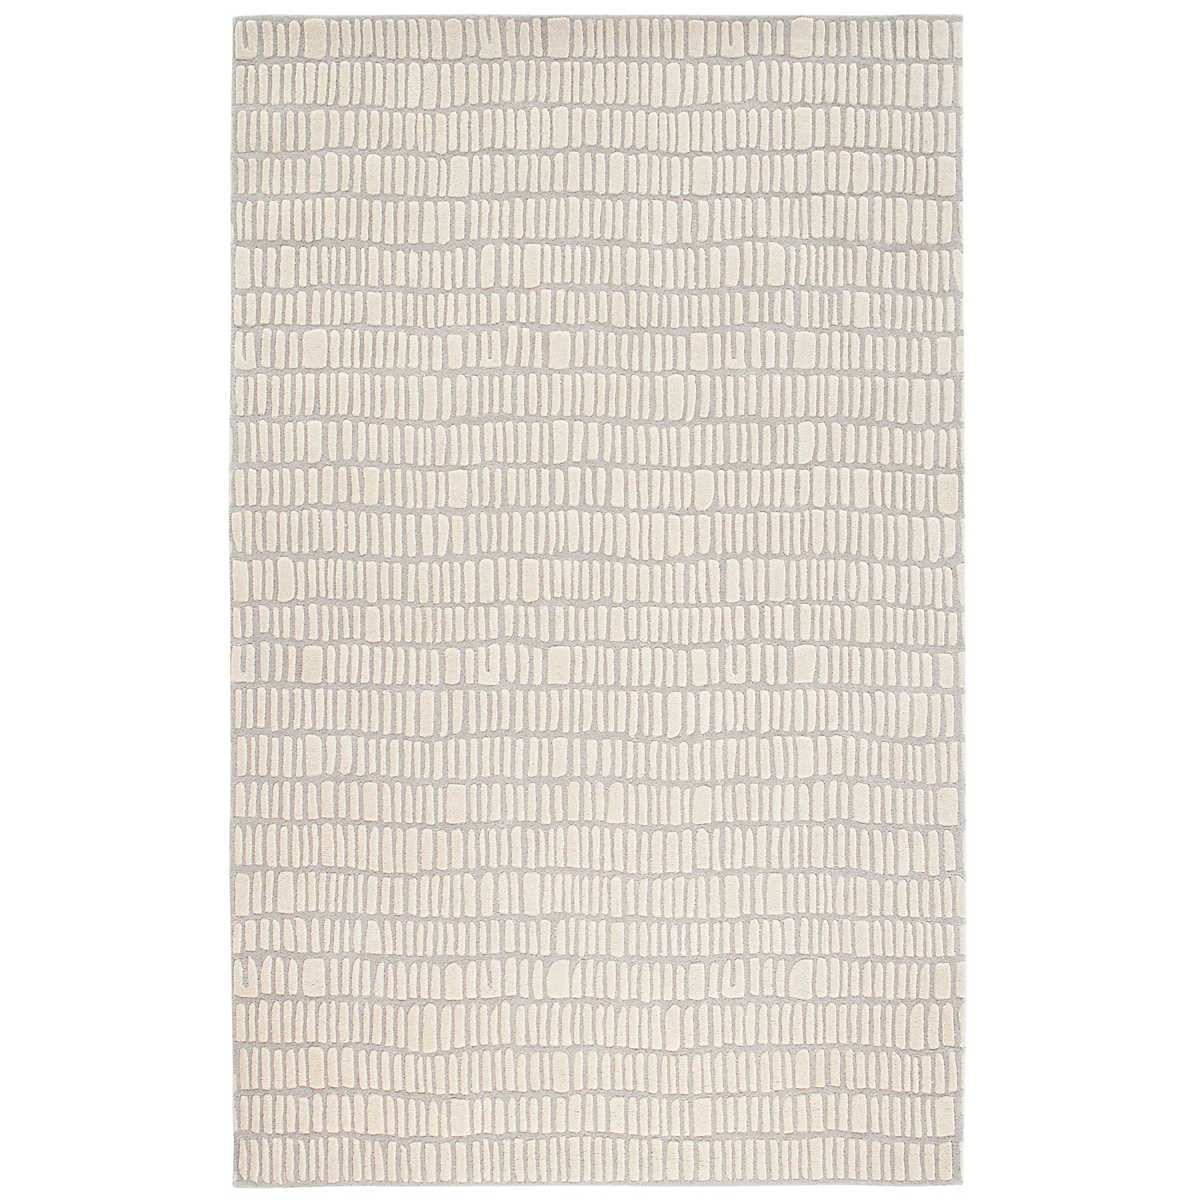 The Roark Ivory Rug design of this luxurious, plush wool rug conjures surfaces of ancient hand-laid rock walls. The contrast between stone and mortar is further represented by the meticulously tufted high and low levels of the velvety hand-sheared pile. Amethyst Home provides interior design services, furniture, rugs, and lighting in the Salt Lake City metro area.